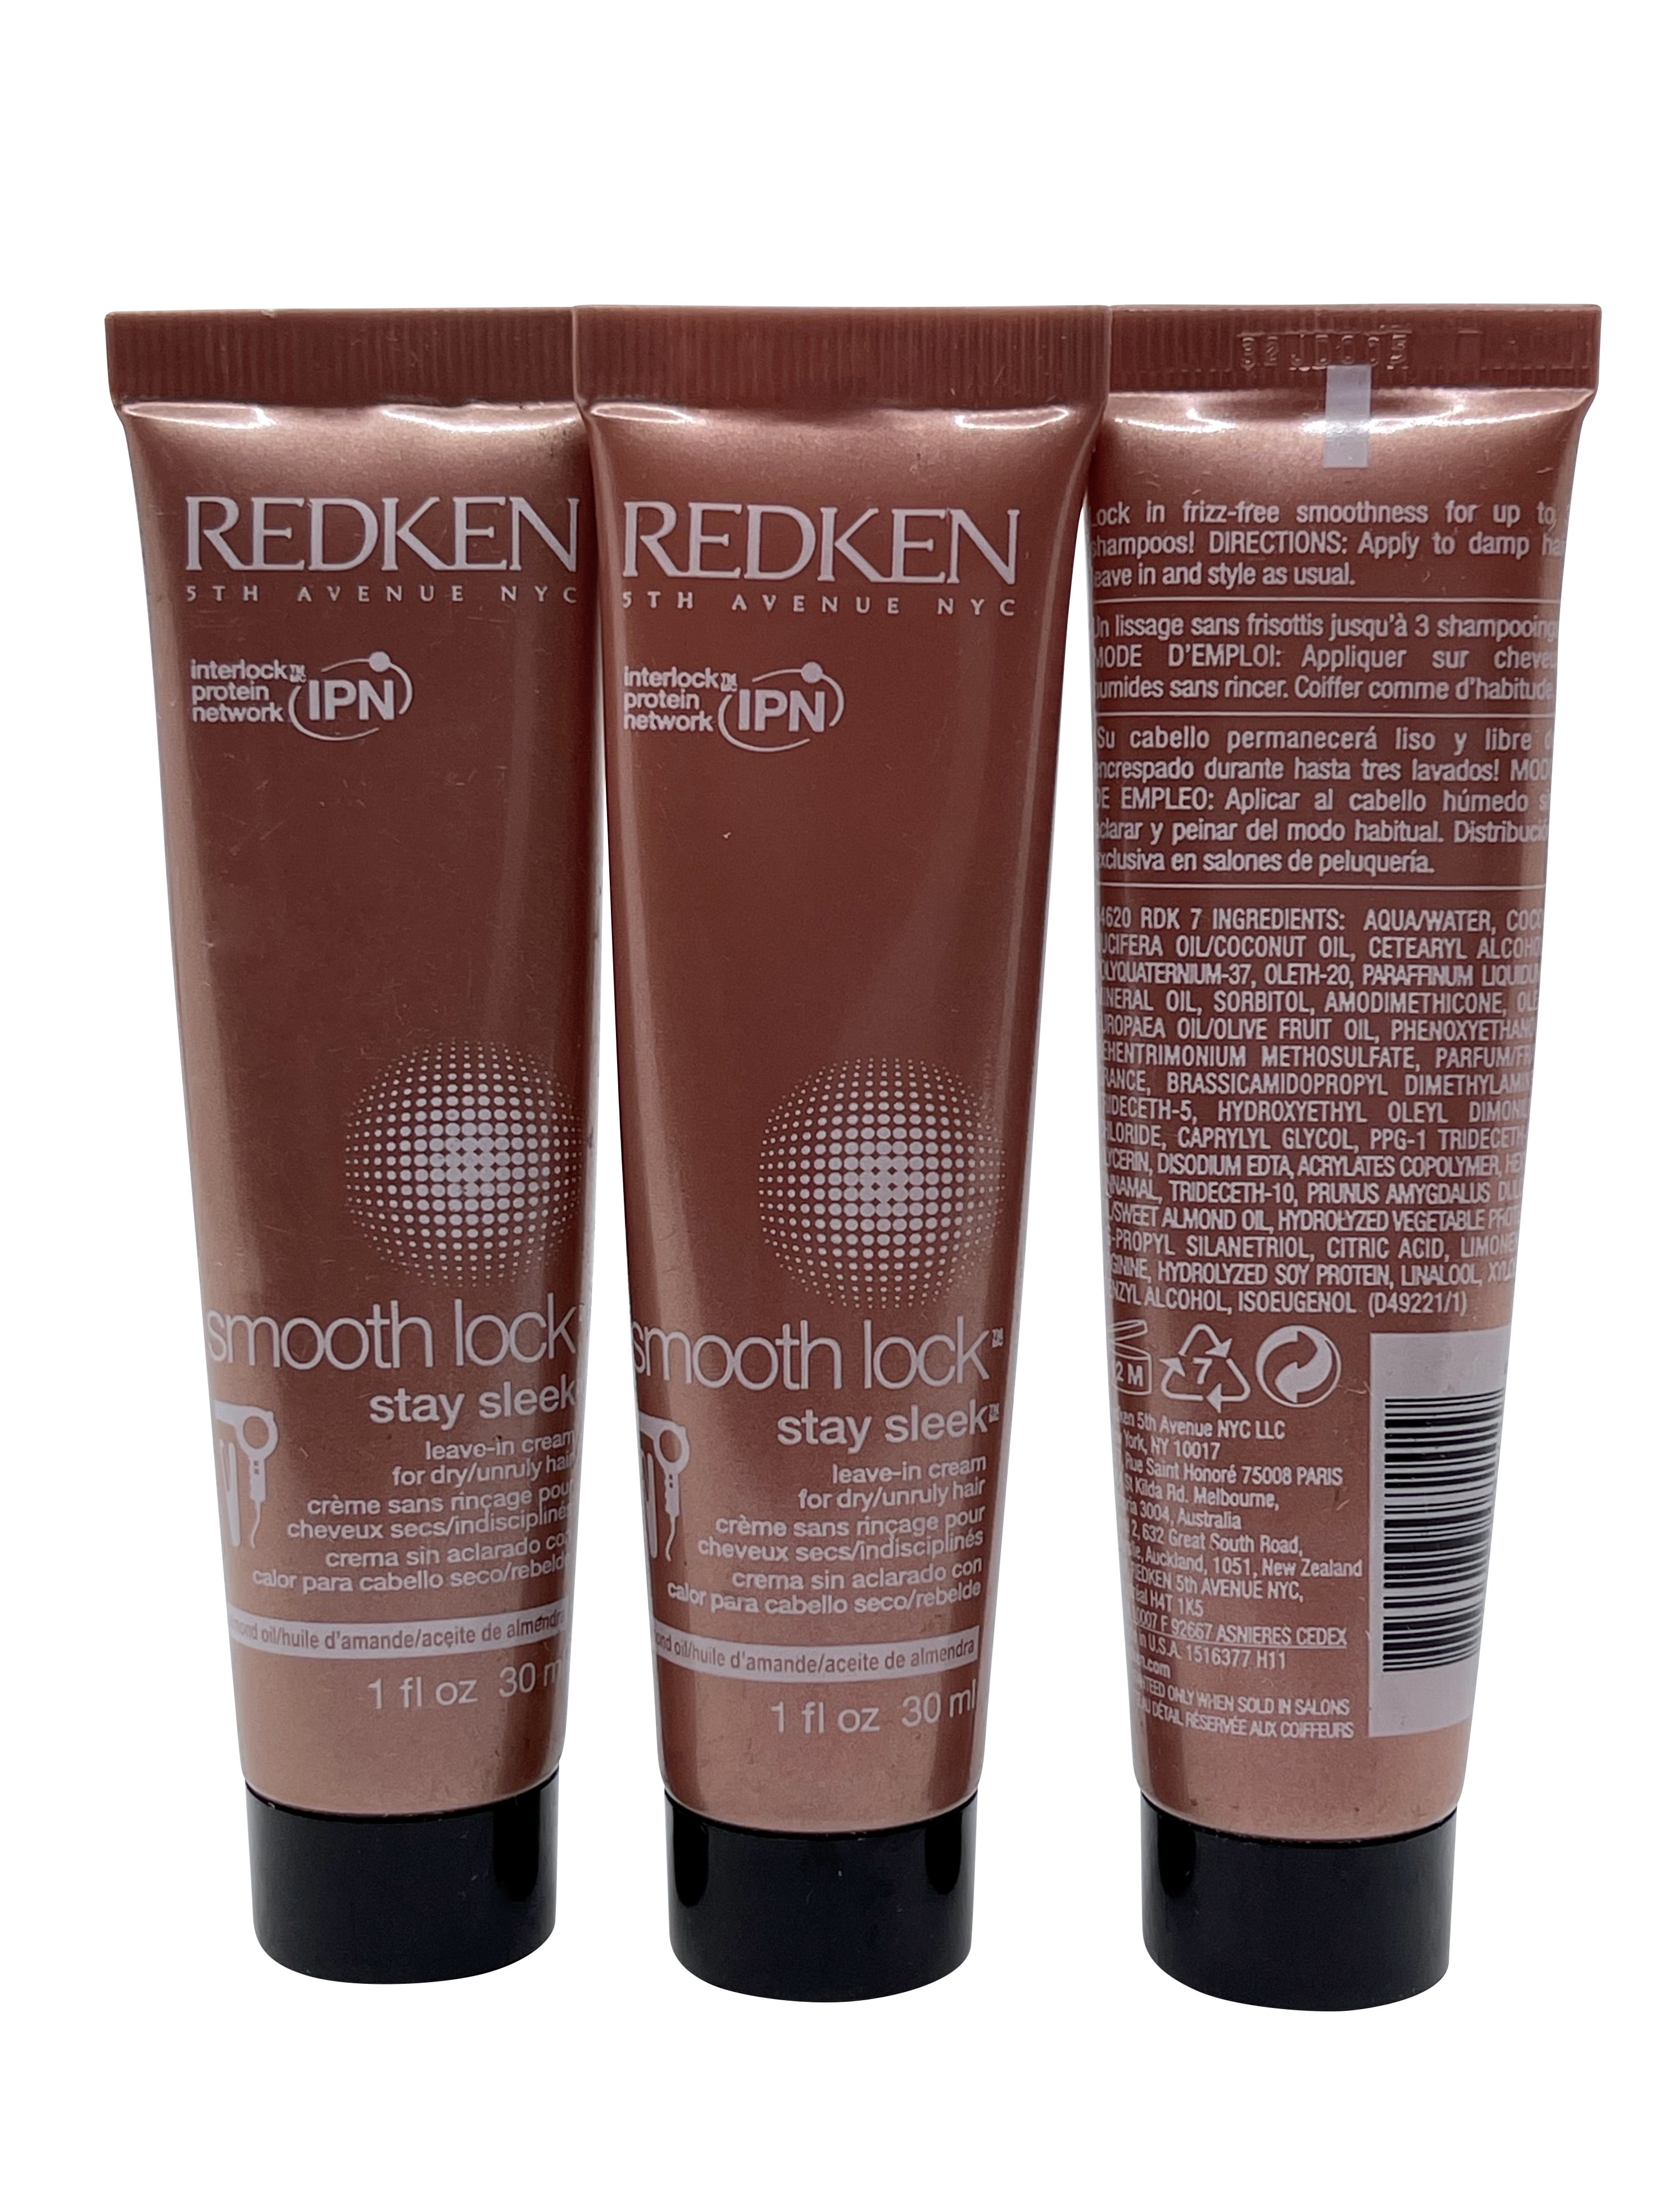 Redken Smooth Lock Stay Leave-In Cream 1 Oz of 3) - Walmart.com